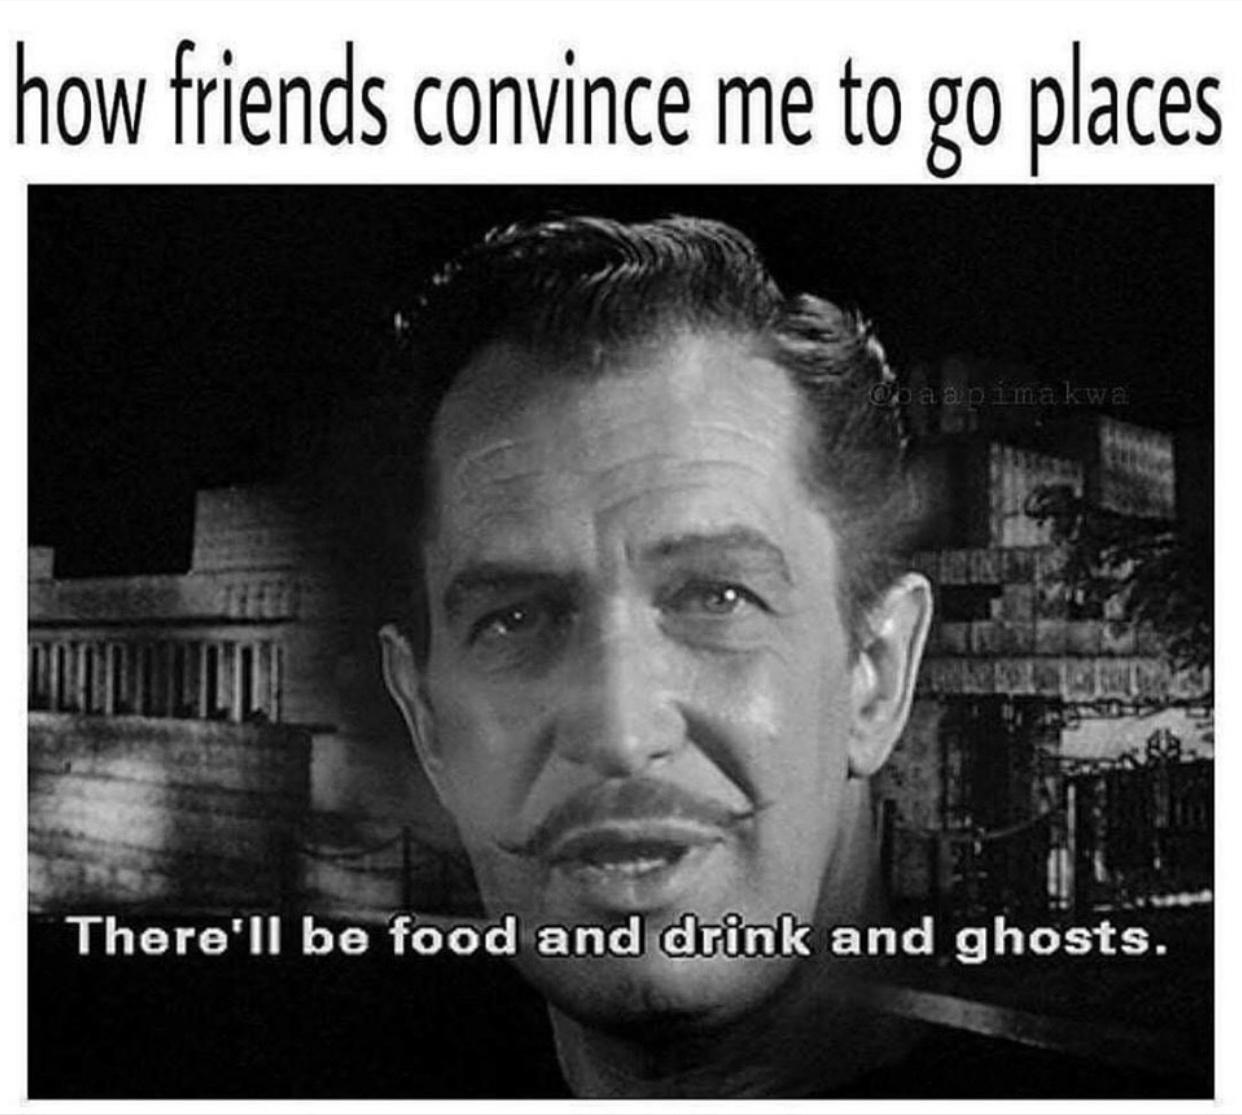 monday morning randomness - house on haunted hill 1959 - how friends convince me to go places obaap ina kwa Ge There'll be food and drink and ghosts.